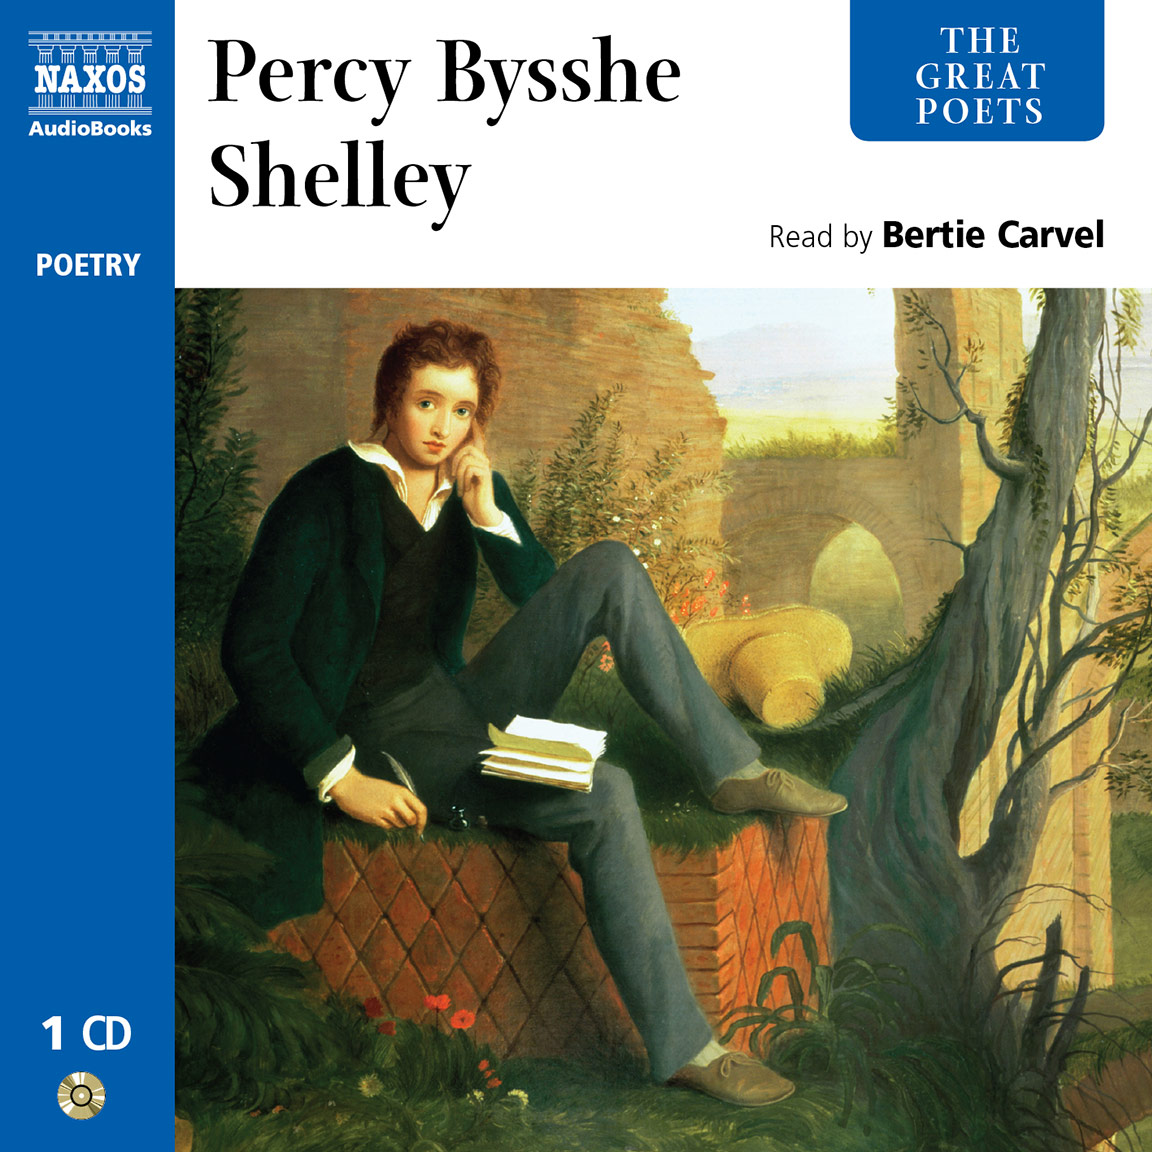 Greatest poet. Percy Bysshe Shelley. Percy Bysshe Shelley и Байрон. Bysshe Shelley's book. Love's Philosophy by Percy Bysshe Shelley.